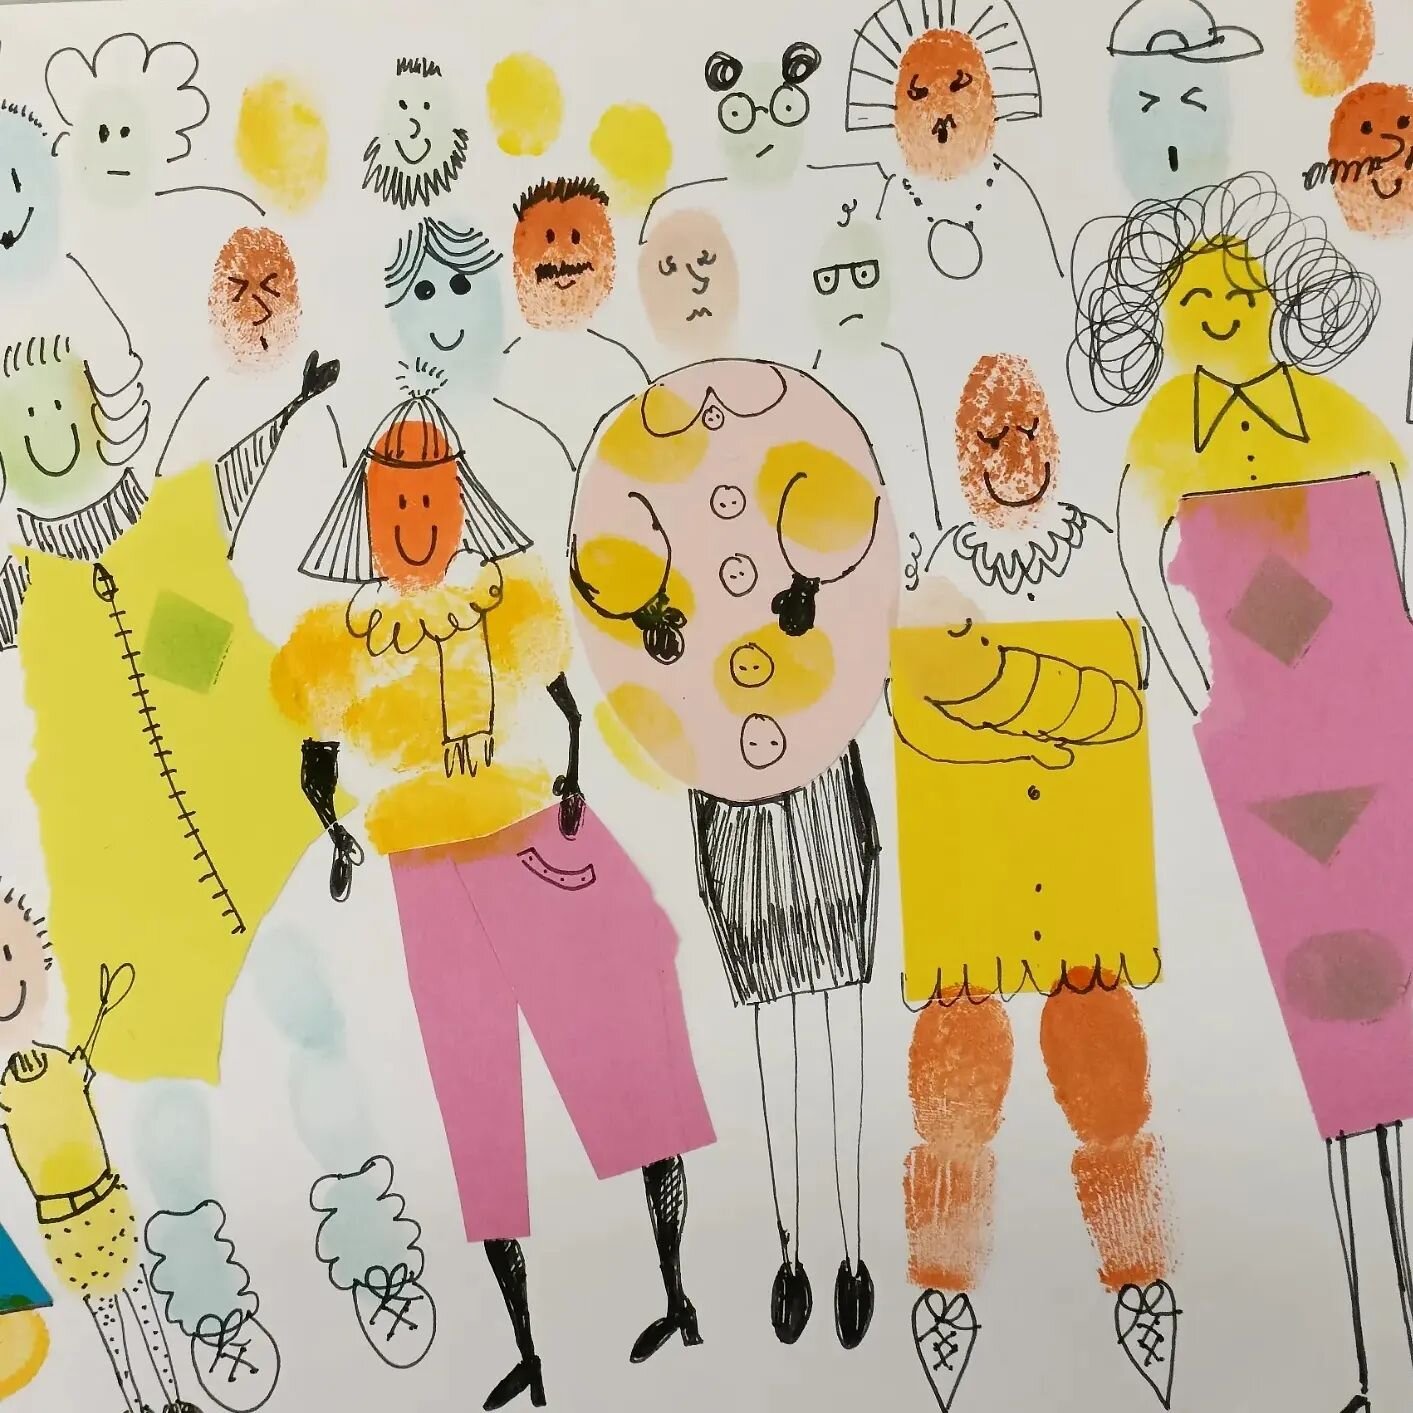 A crowd of city characters from our young artist last week. Creative play with shapes and finger printing. ❤️

Bookings are open  for our spring term Wednesday afterschool class in Seaford. DM for details 🙂

#characters #illustration #youngillustrat